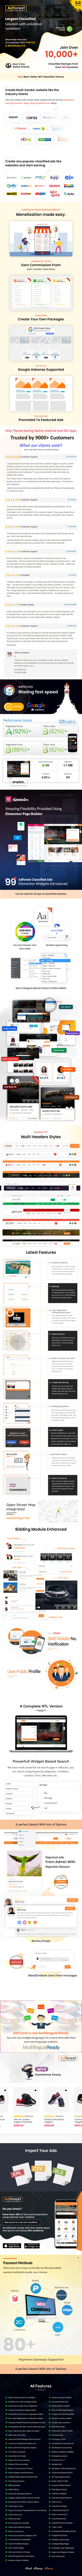 adforest classified theme 5.0